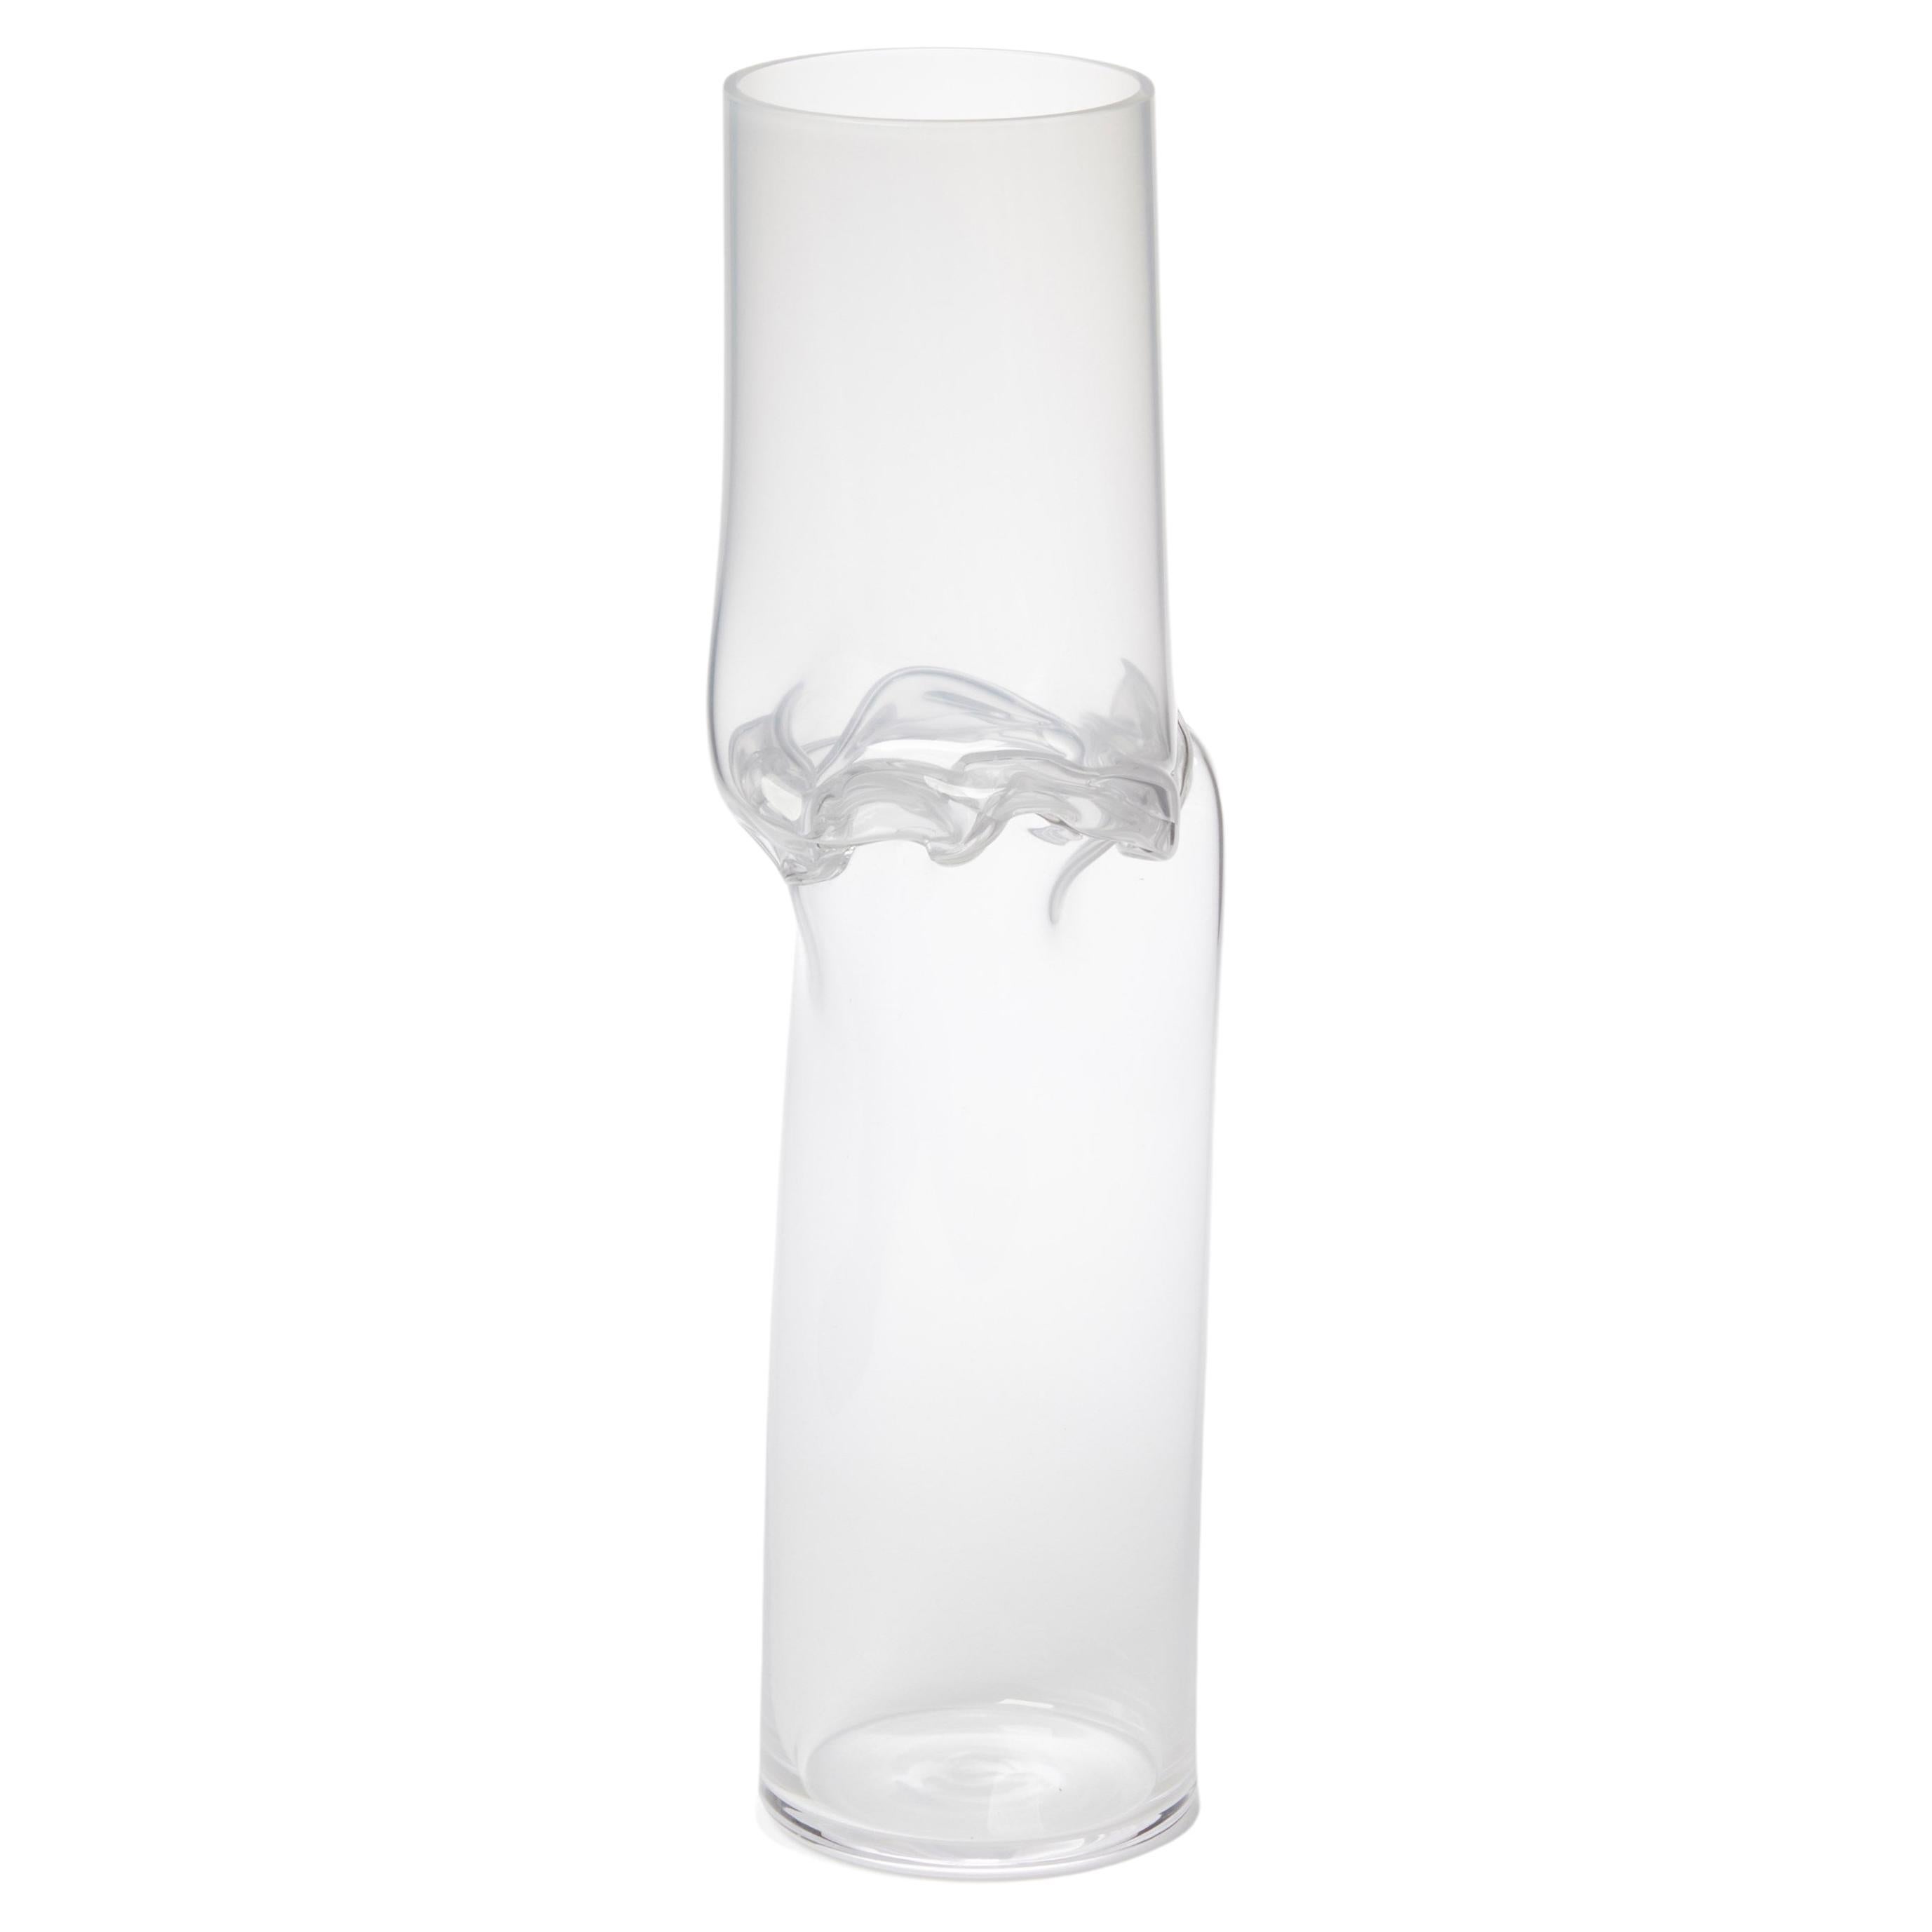 Torsion in Opal White 22/02, clear & white glass sculptural vessel by Emma Baker